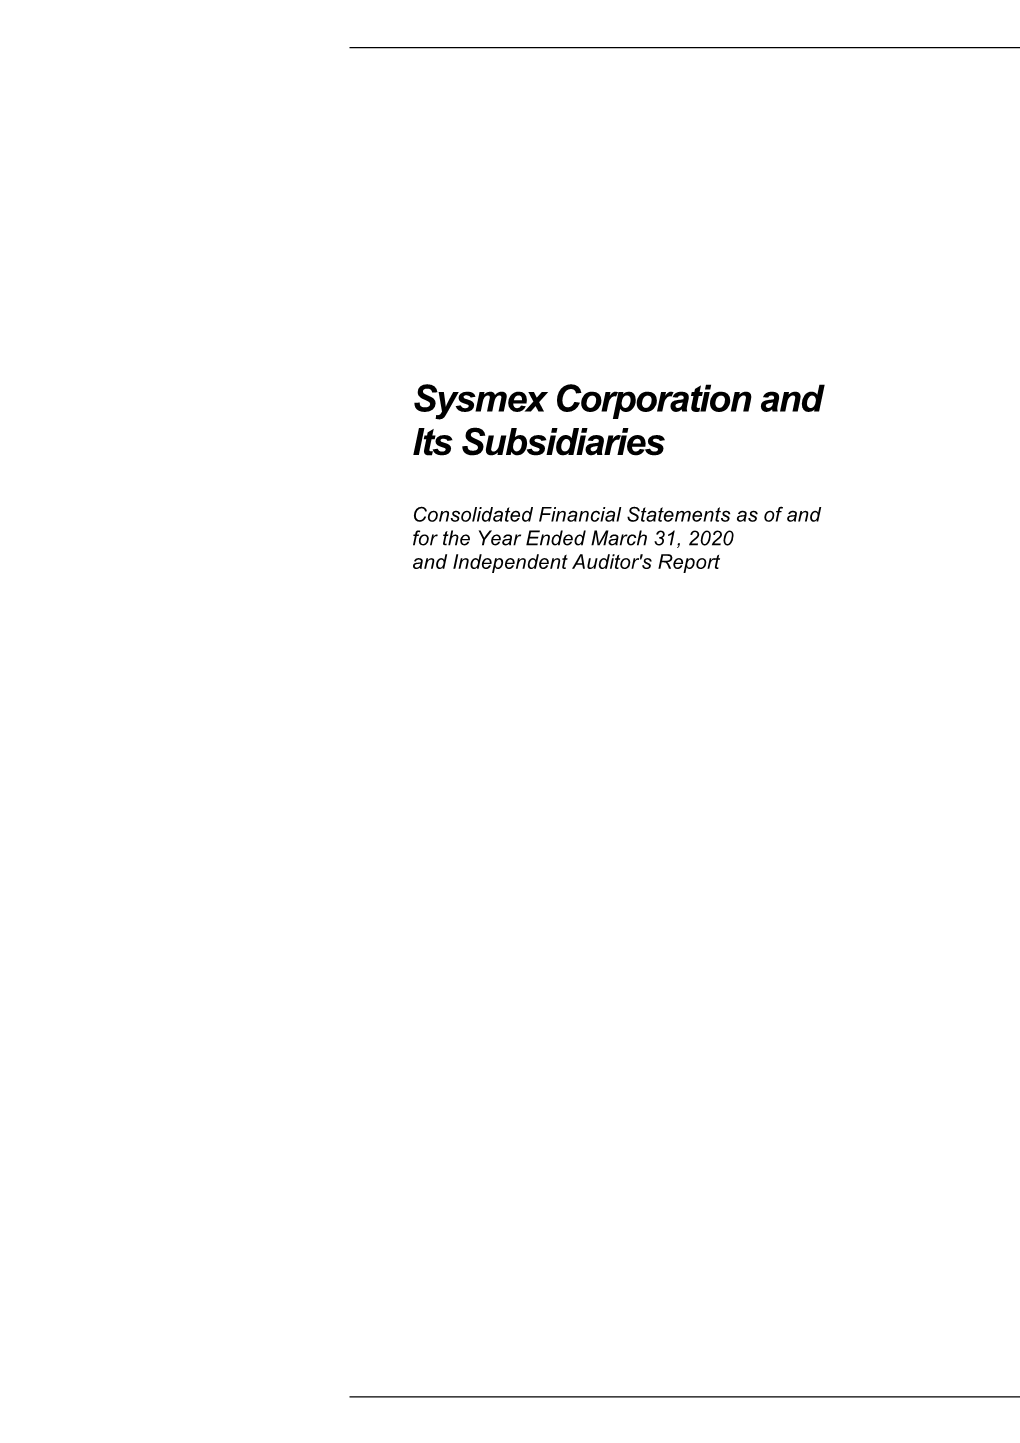 Sysmex Corporation and Its Subsidiaries